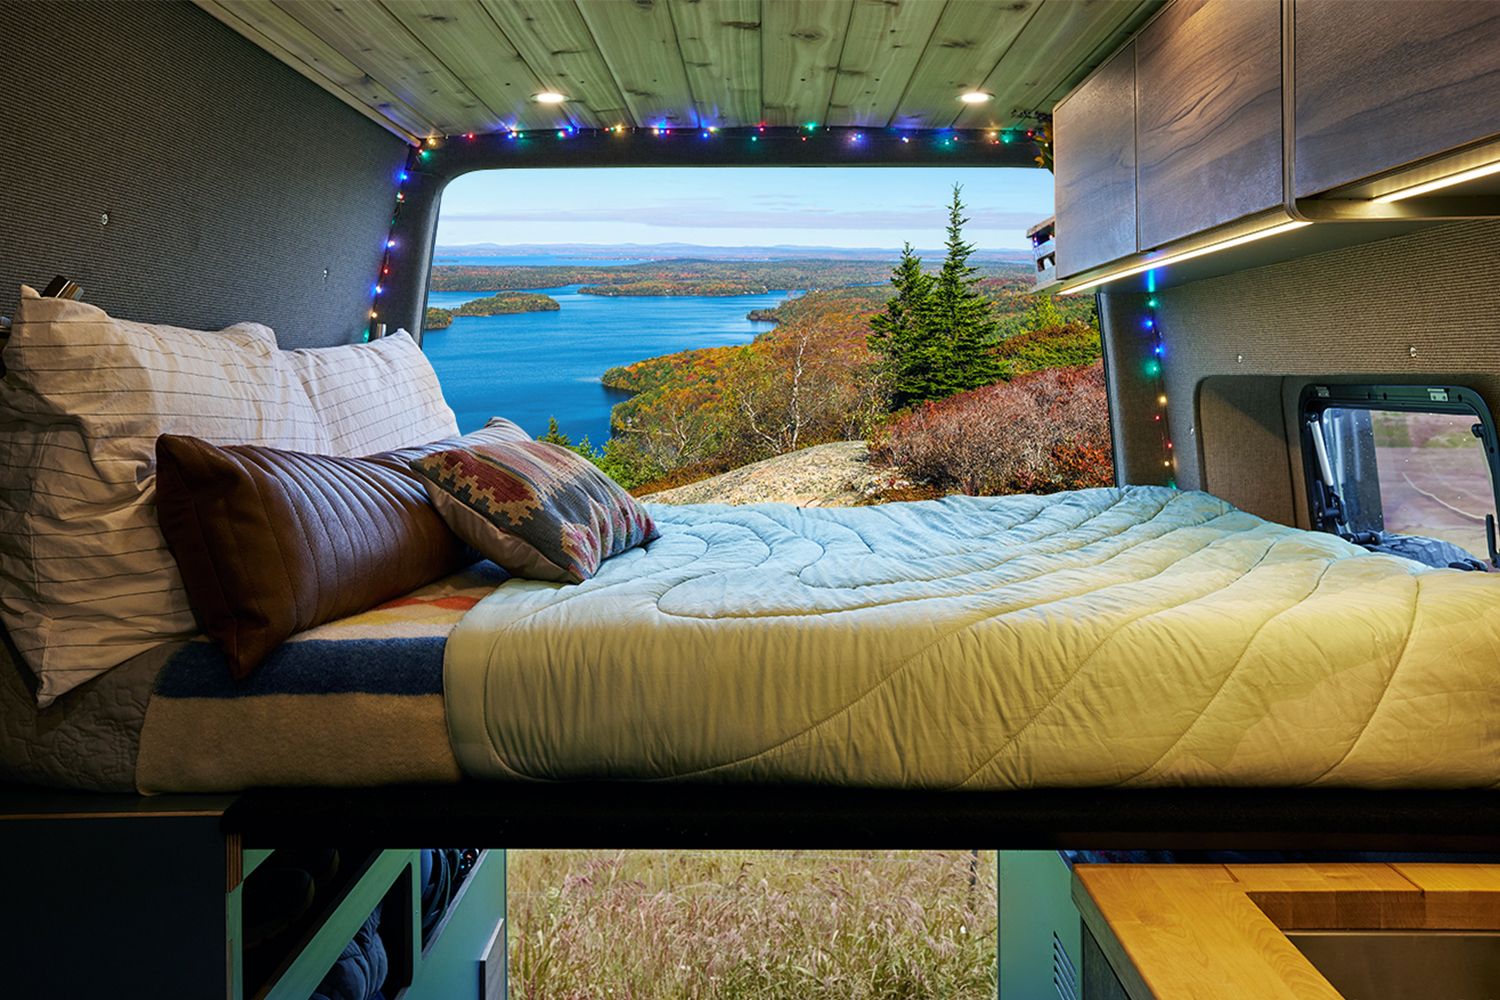 A view out onto a lake and forest from the back of a Mercedes-Benz Vansmith Sprinter Van being given away by Omaze